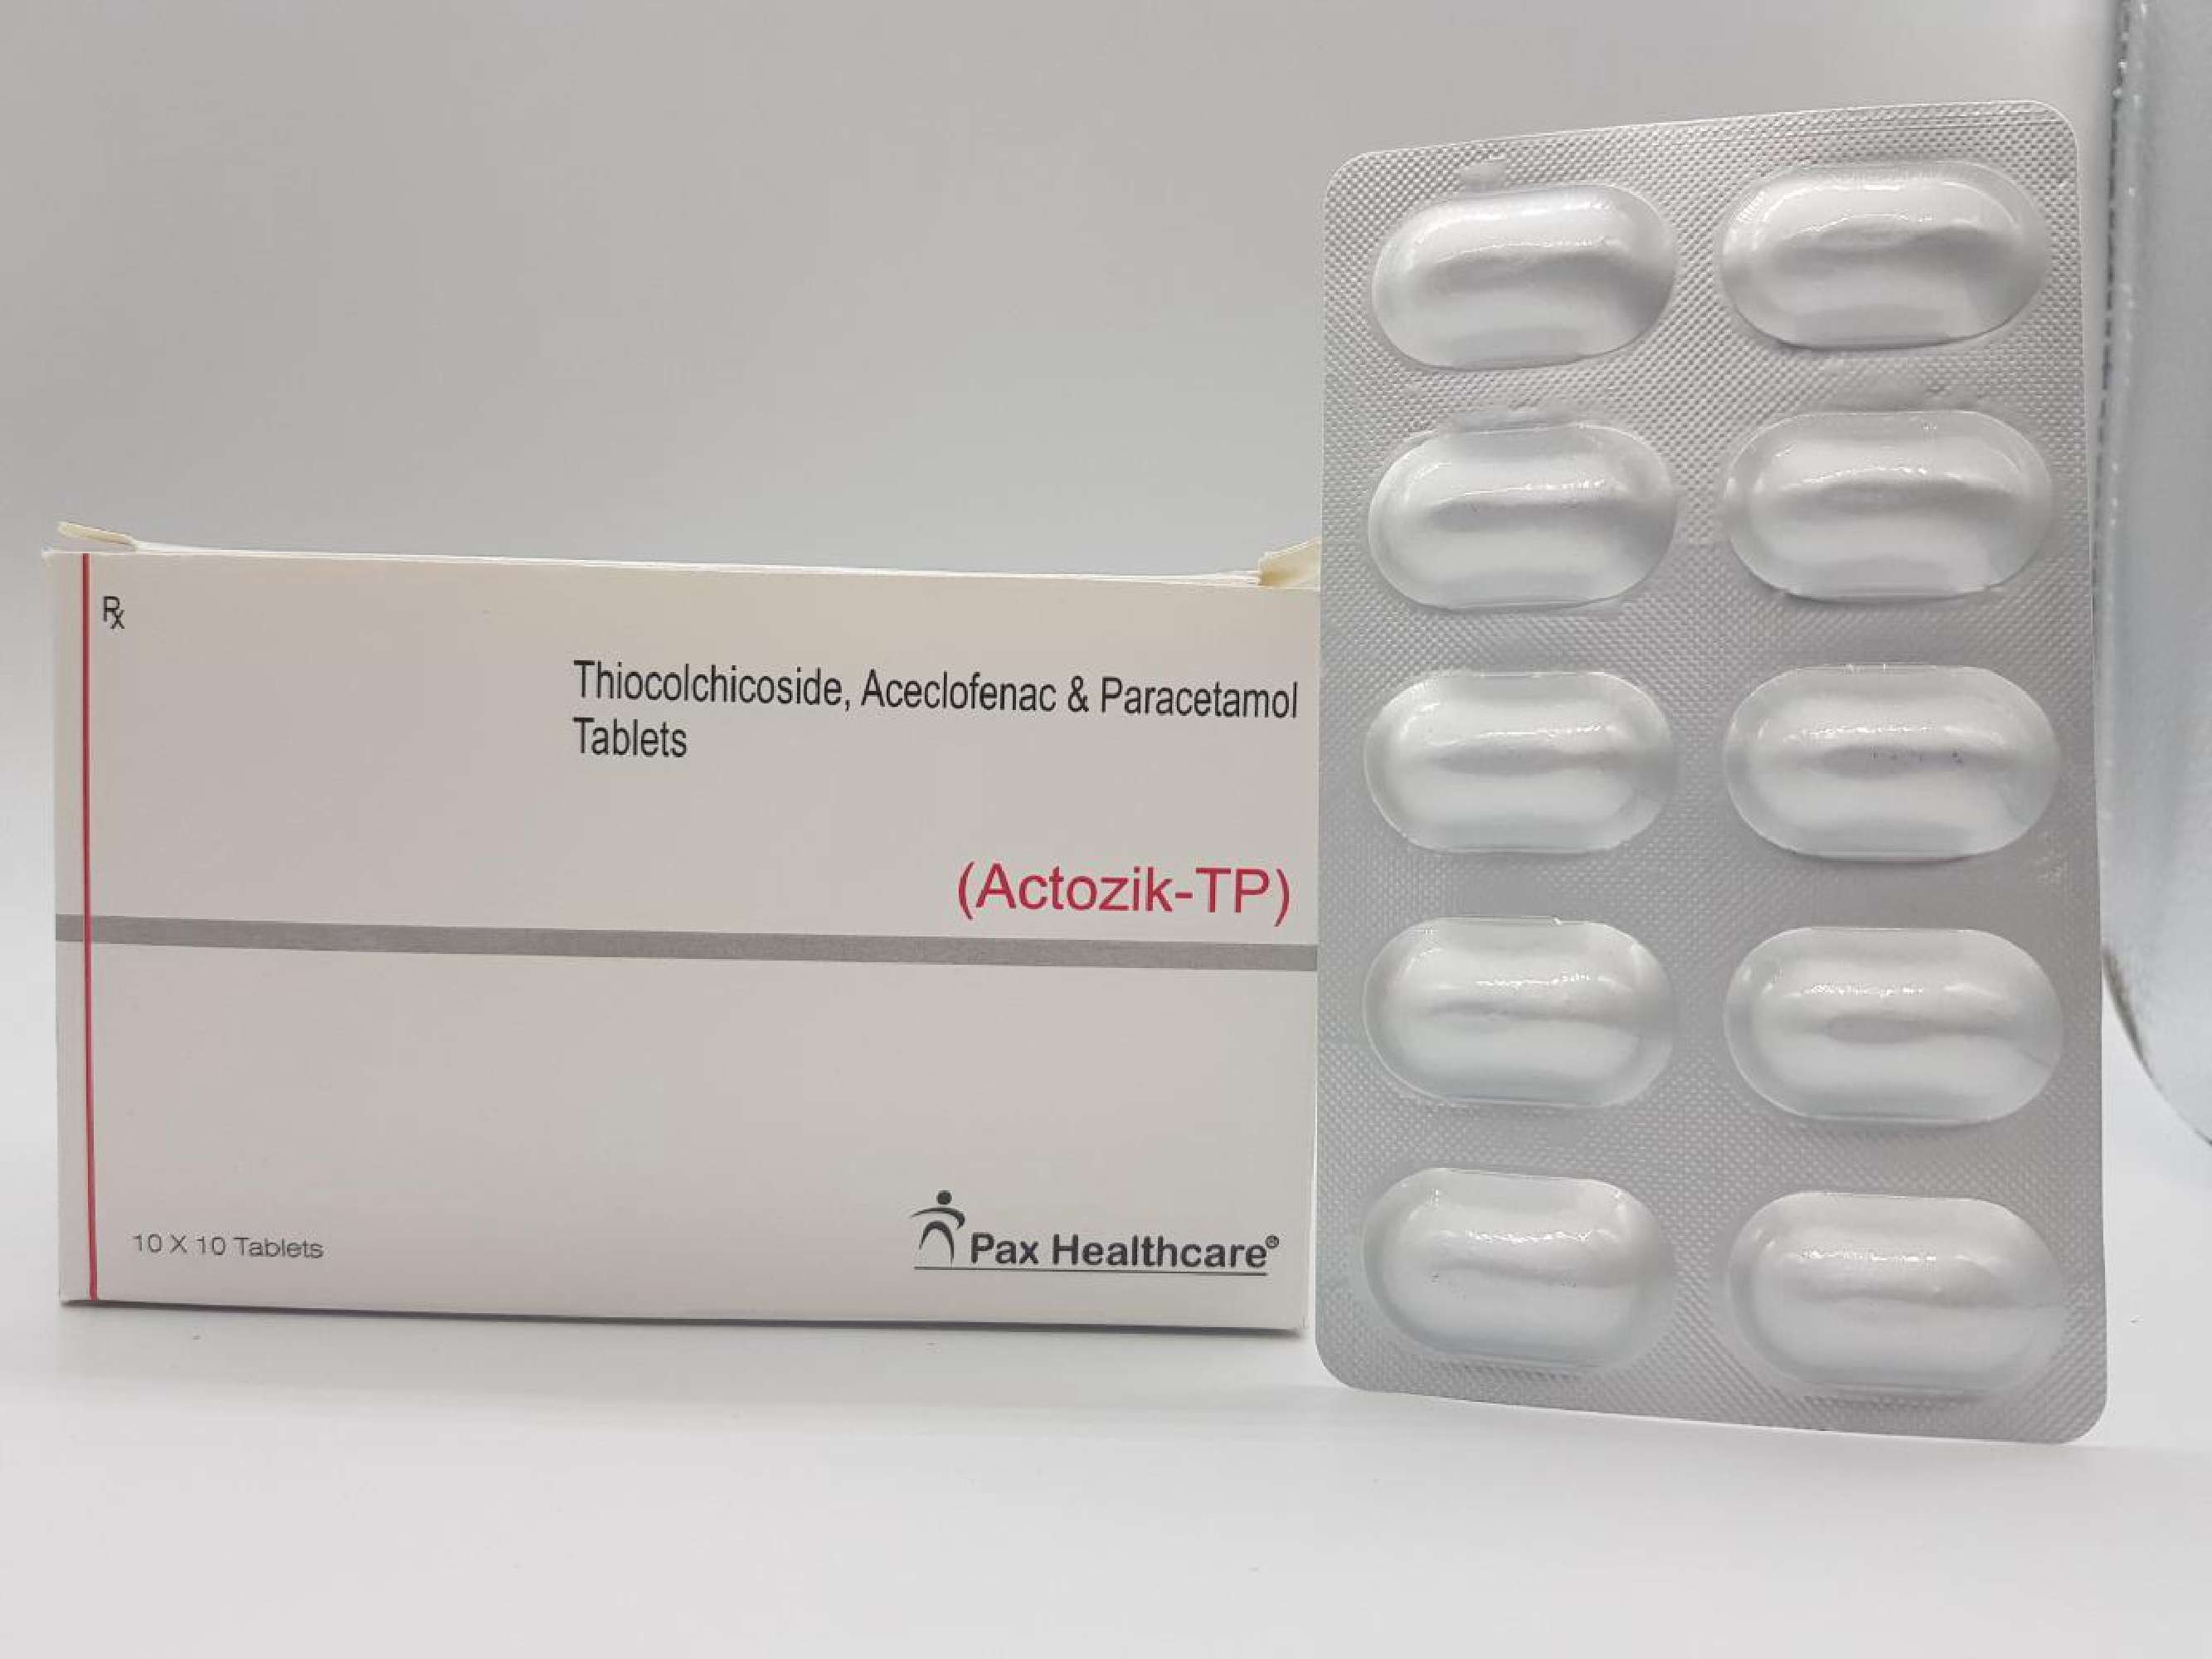 each film coated tablet contains: aceclofenac ip - 100 mg + paracetamol ip - 325 mg + thiocolchicoside ip - 4 mg